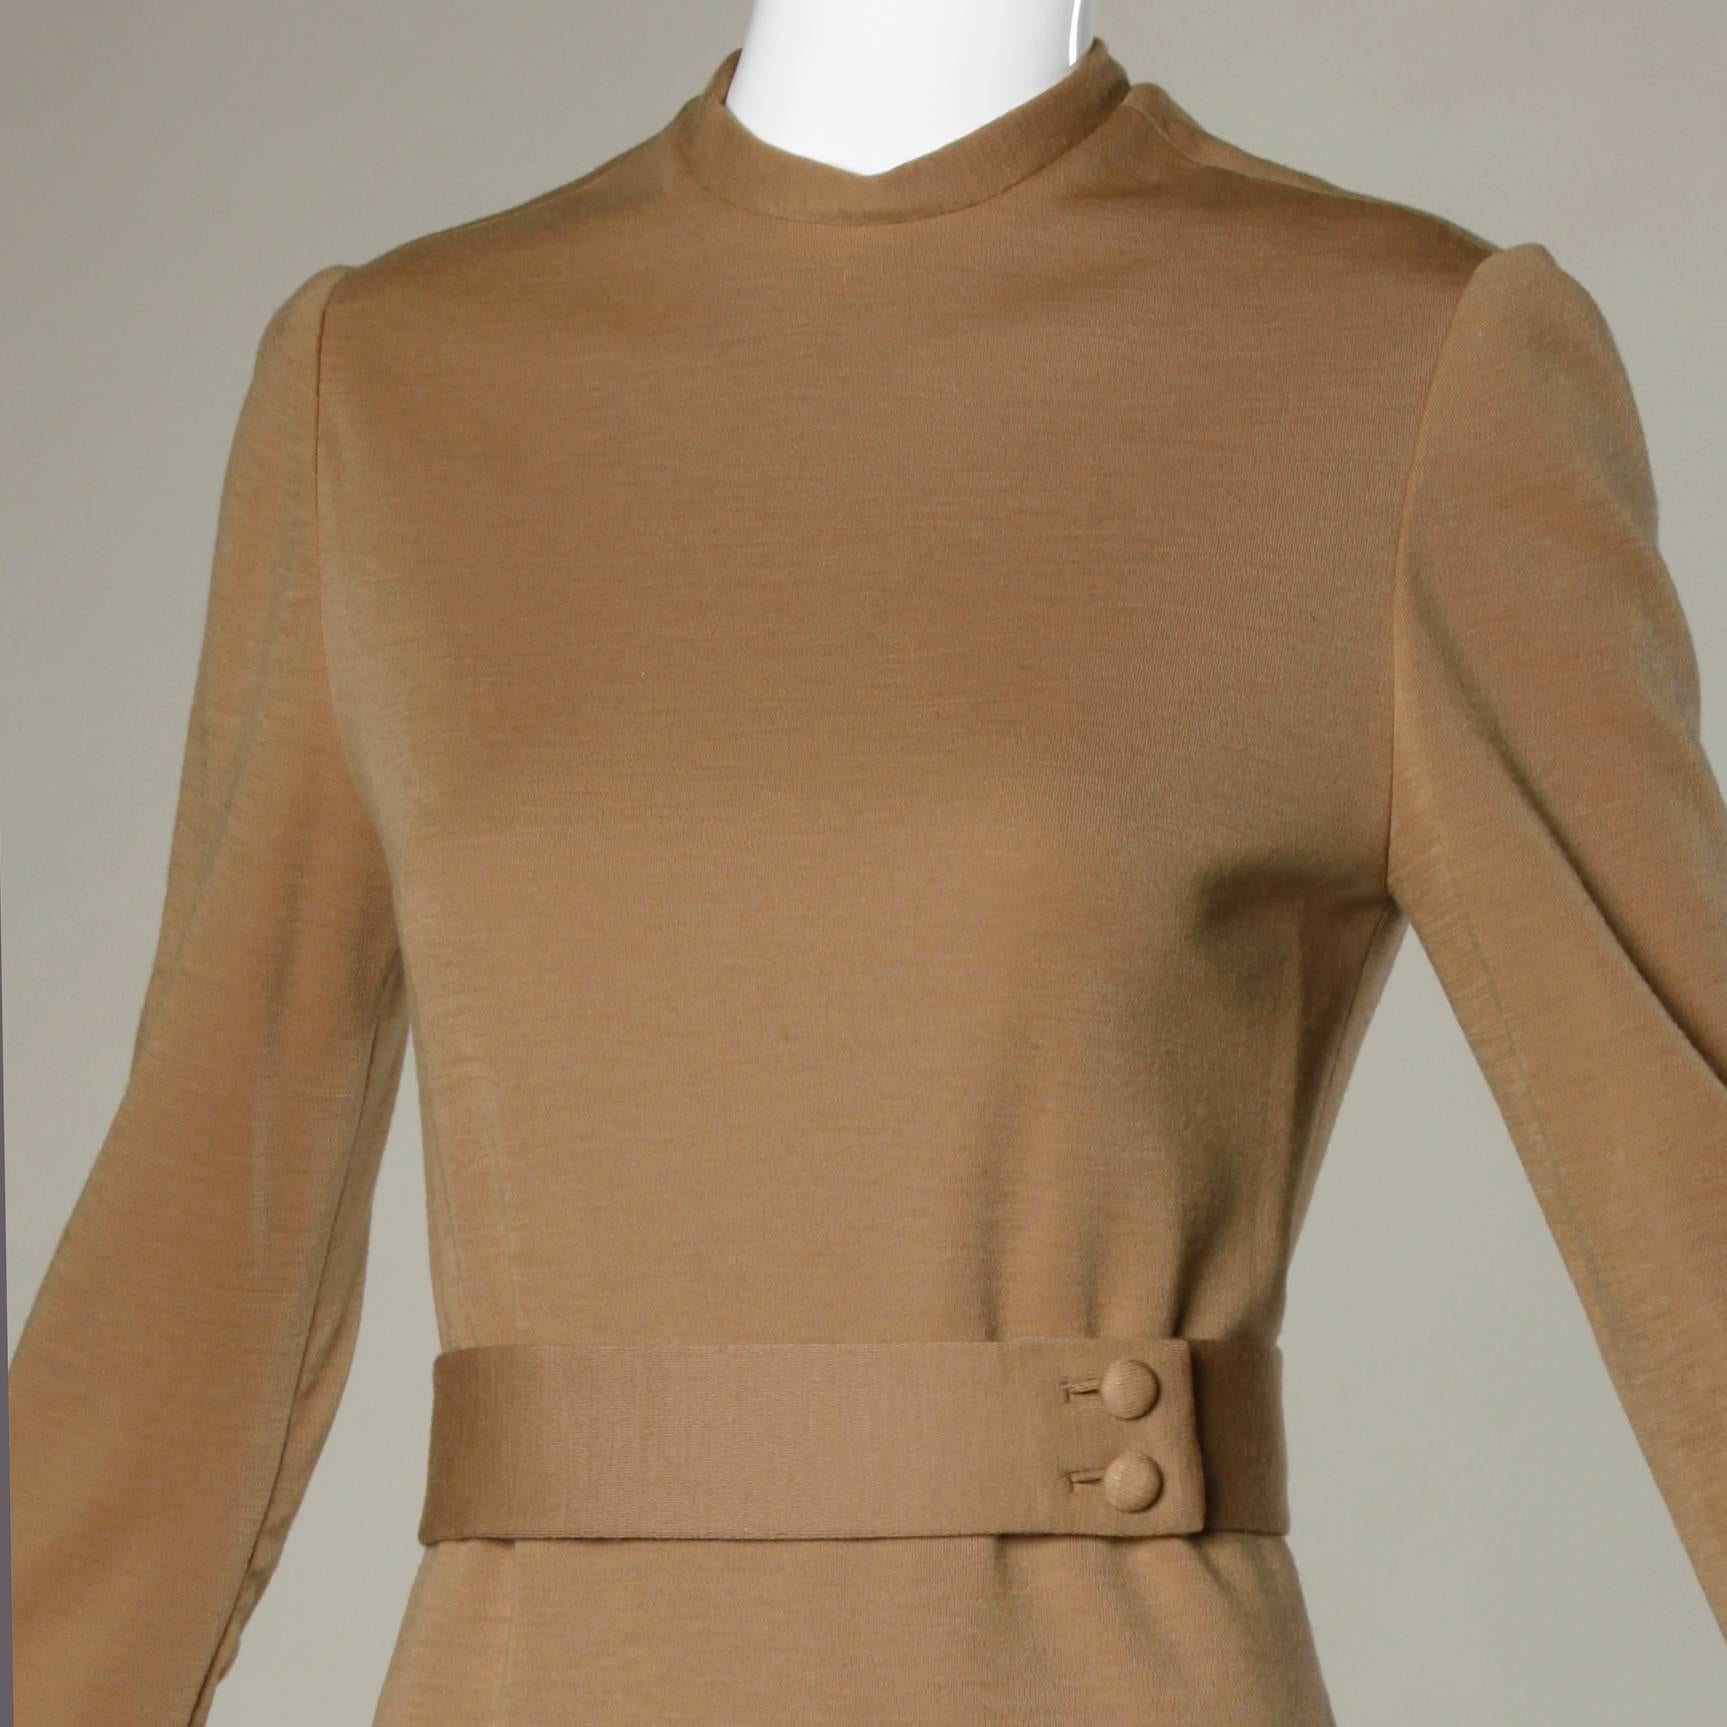 Stunning vintage Norman Norell vintage 1960s camel colored wool knit dress with matching belt. Fully lined in gorgeous quality silk fabric. Hand stitched couture finishing throughout the piece. 

Details:

Fully Lined in Silk
Patch